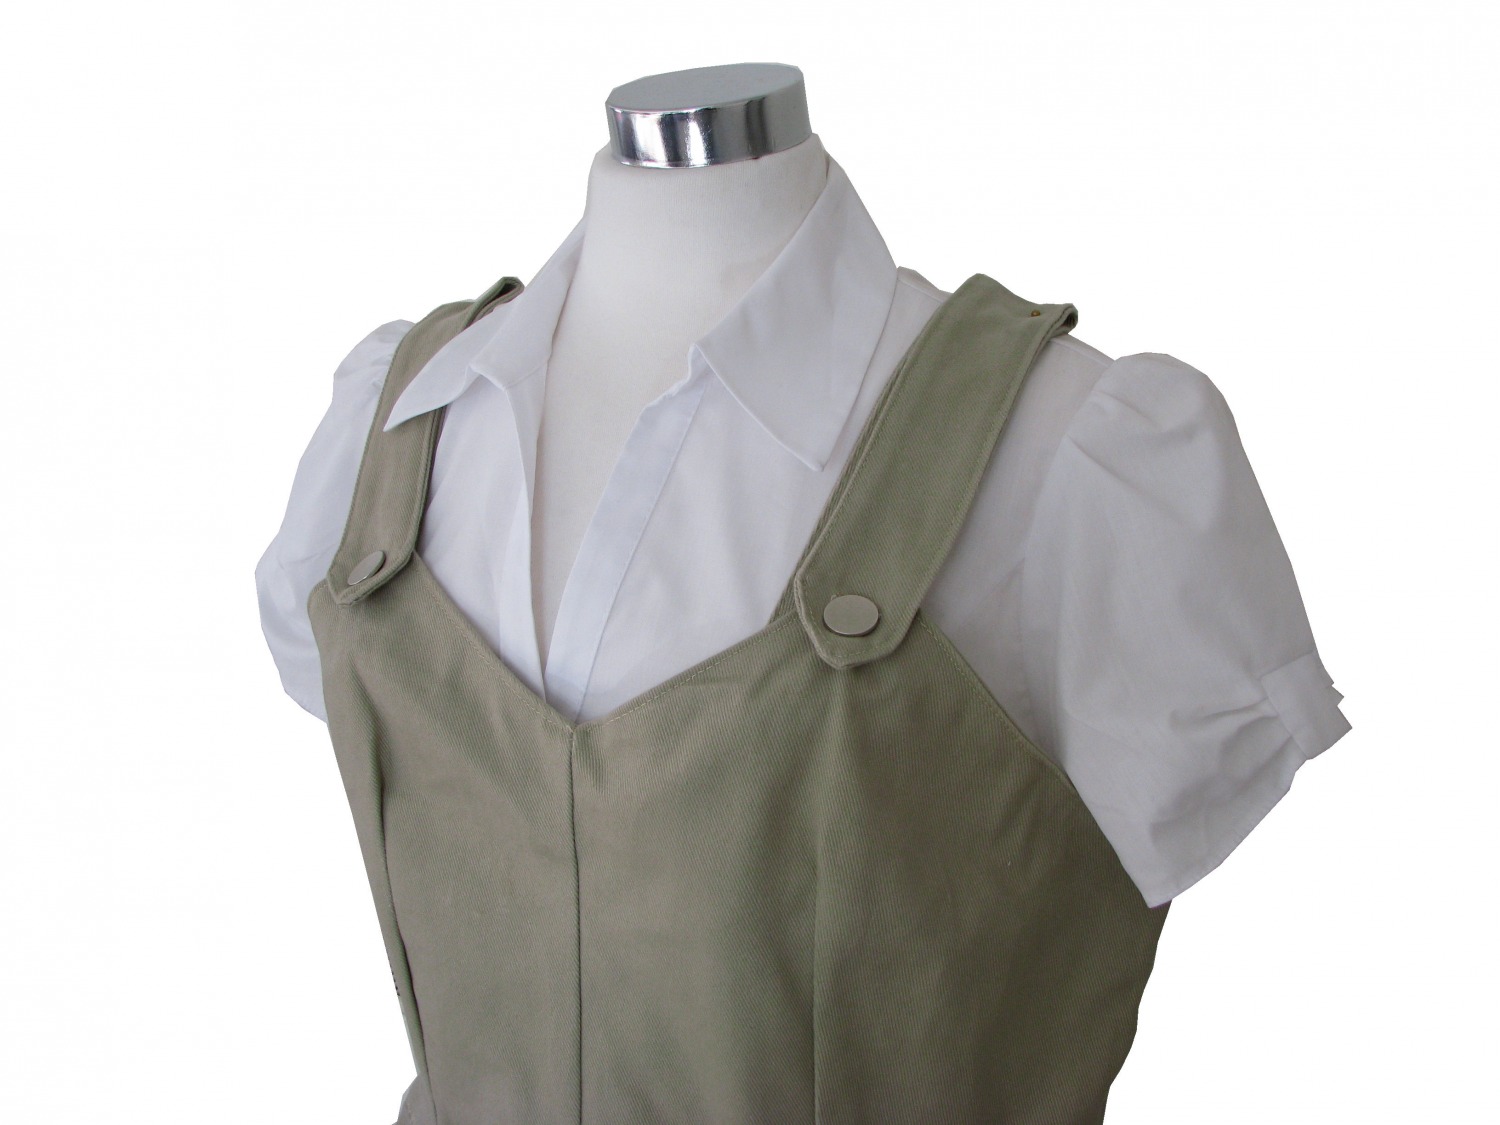 Ladies 1940s Wartime Land Army Costume Size 14 - 16 Image